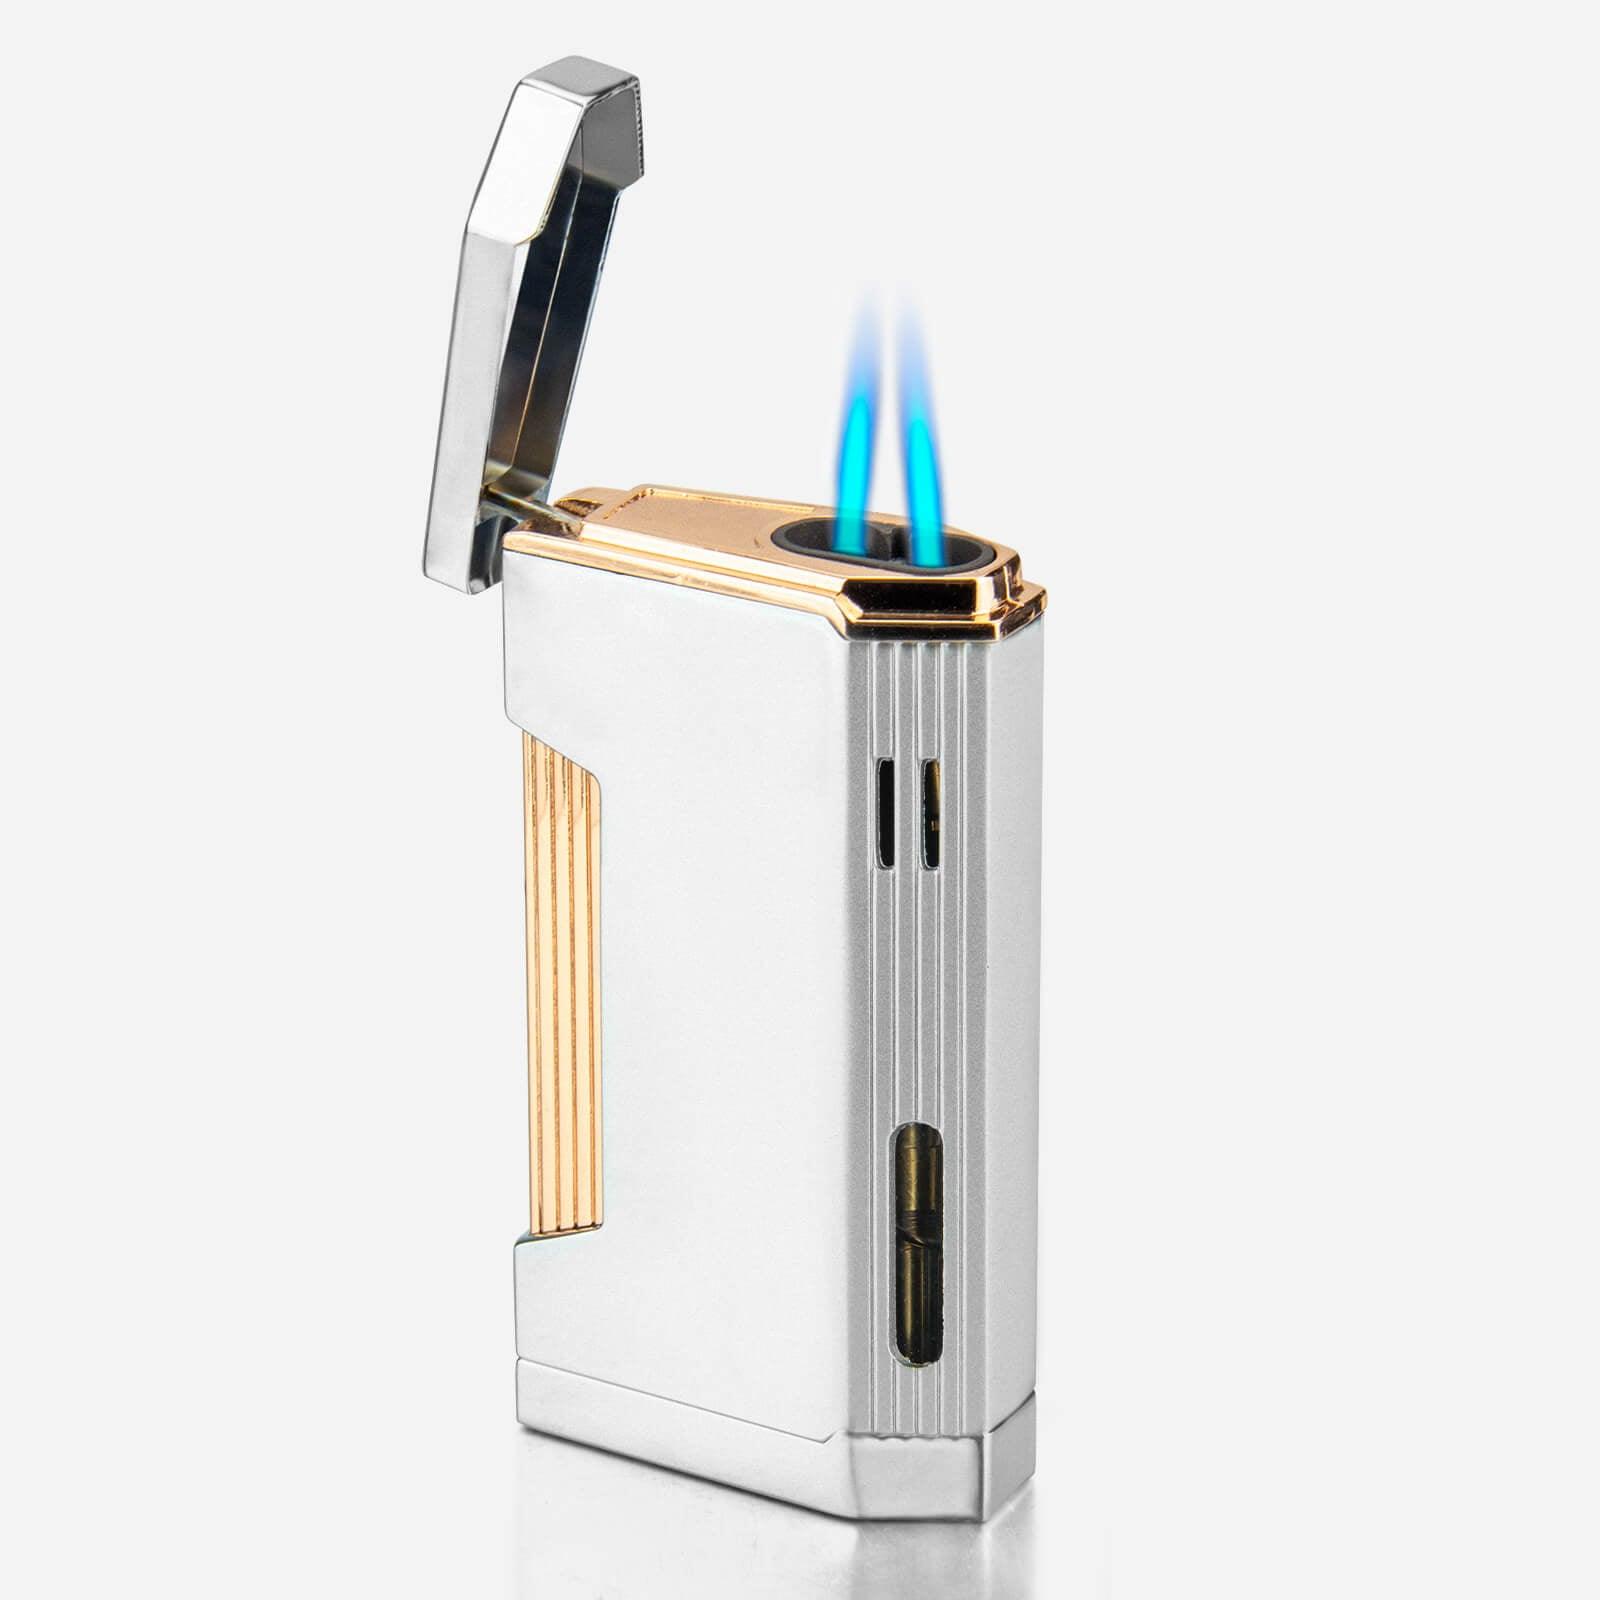  Silver Double Jet Flame Torch Lighter - PILOT DIARY